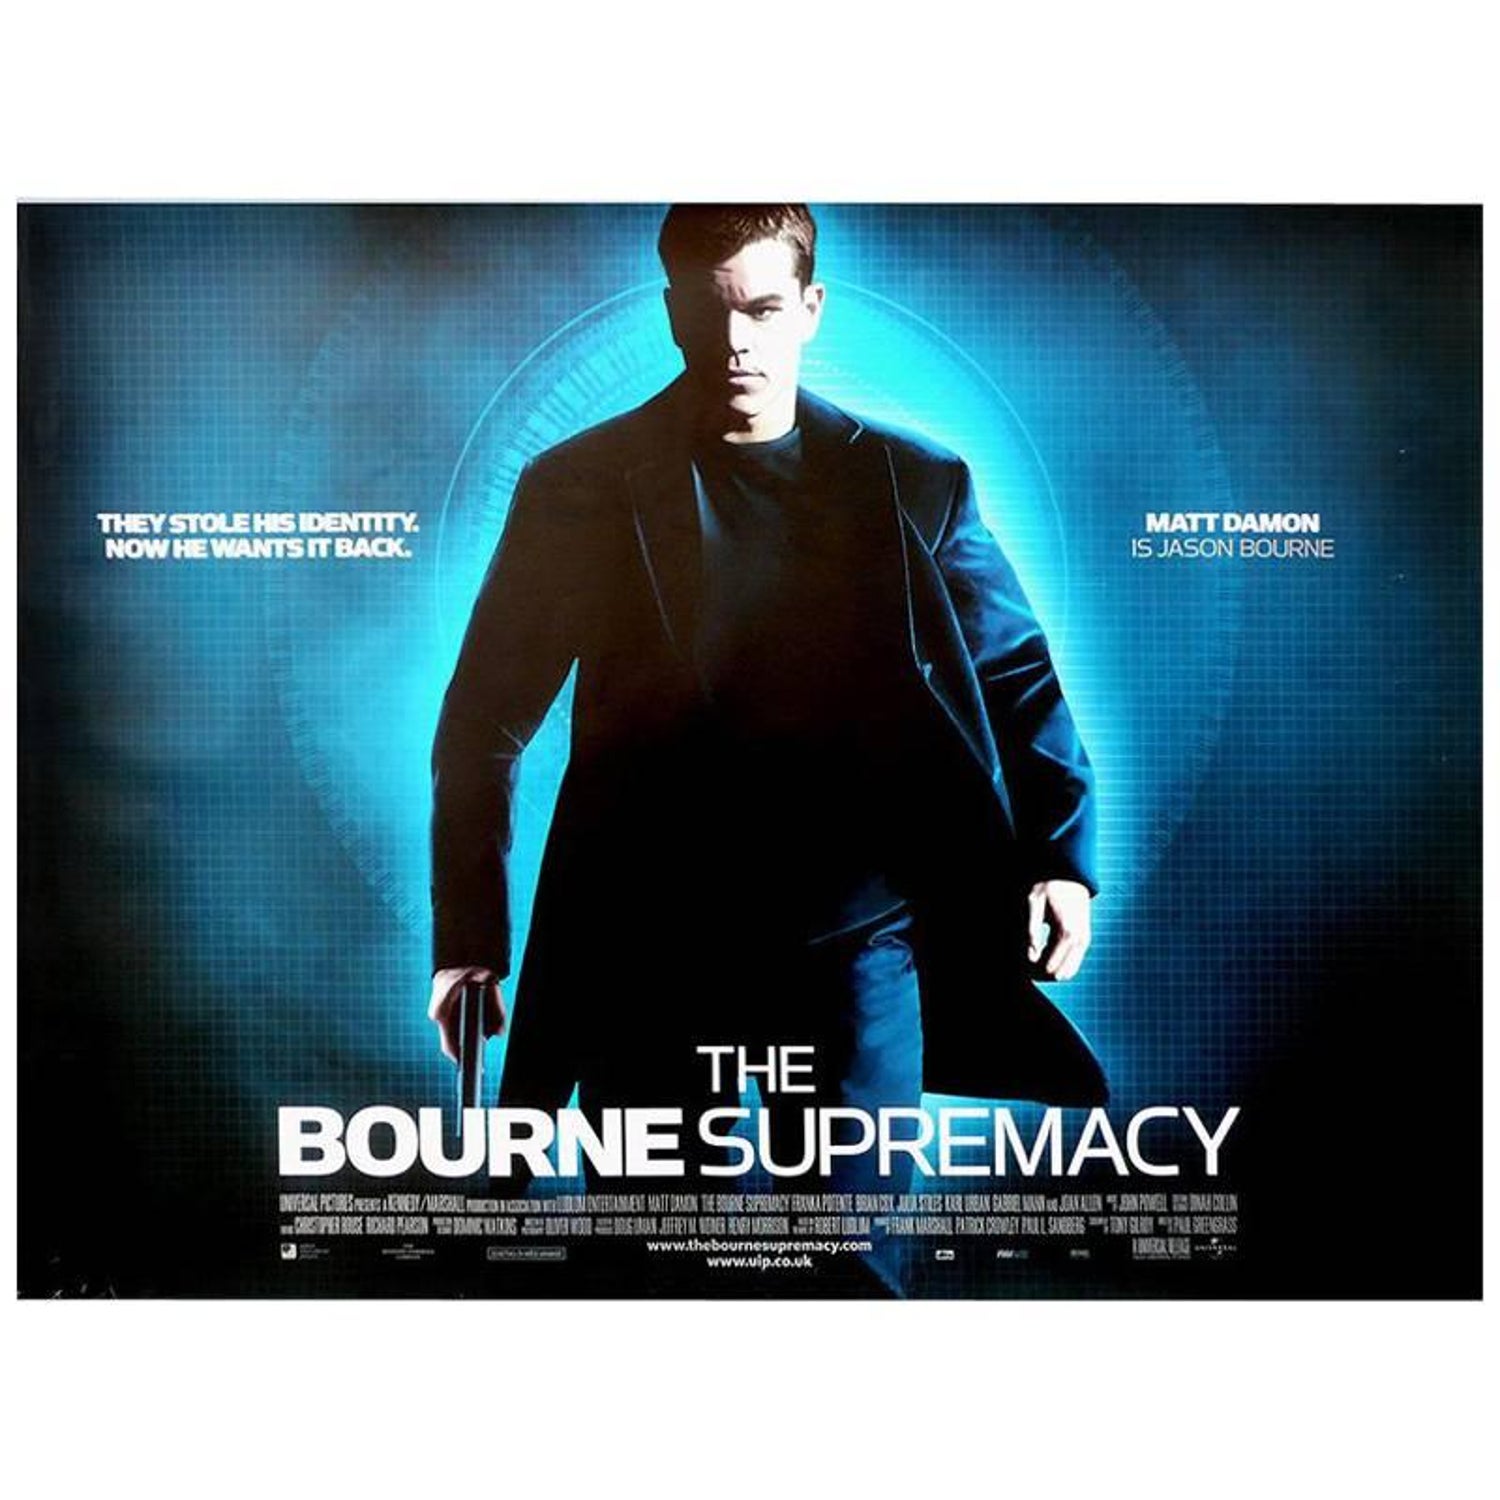 The Bourne Supremacy", Film Poster, 2004 For Sale at 1stDibs